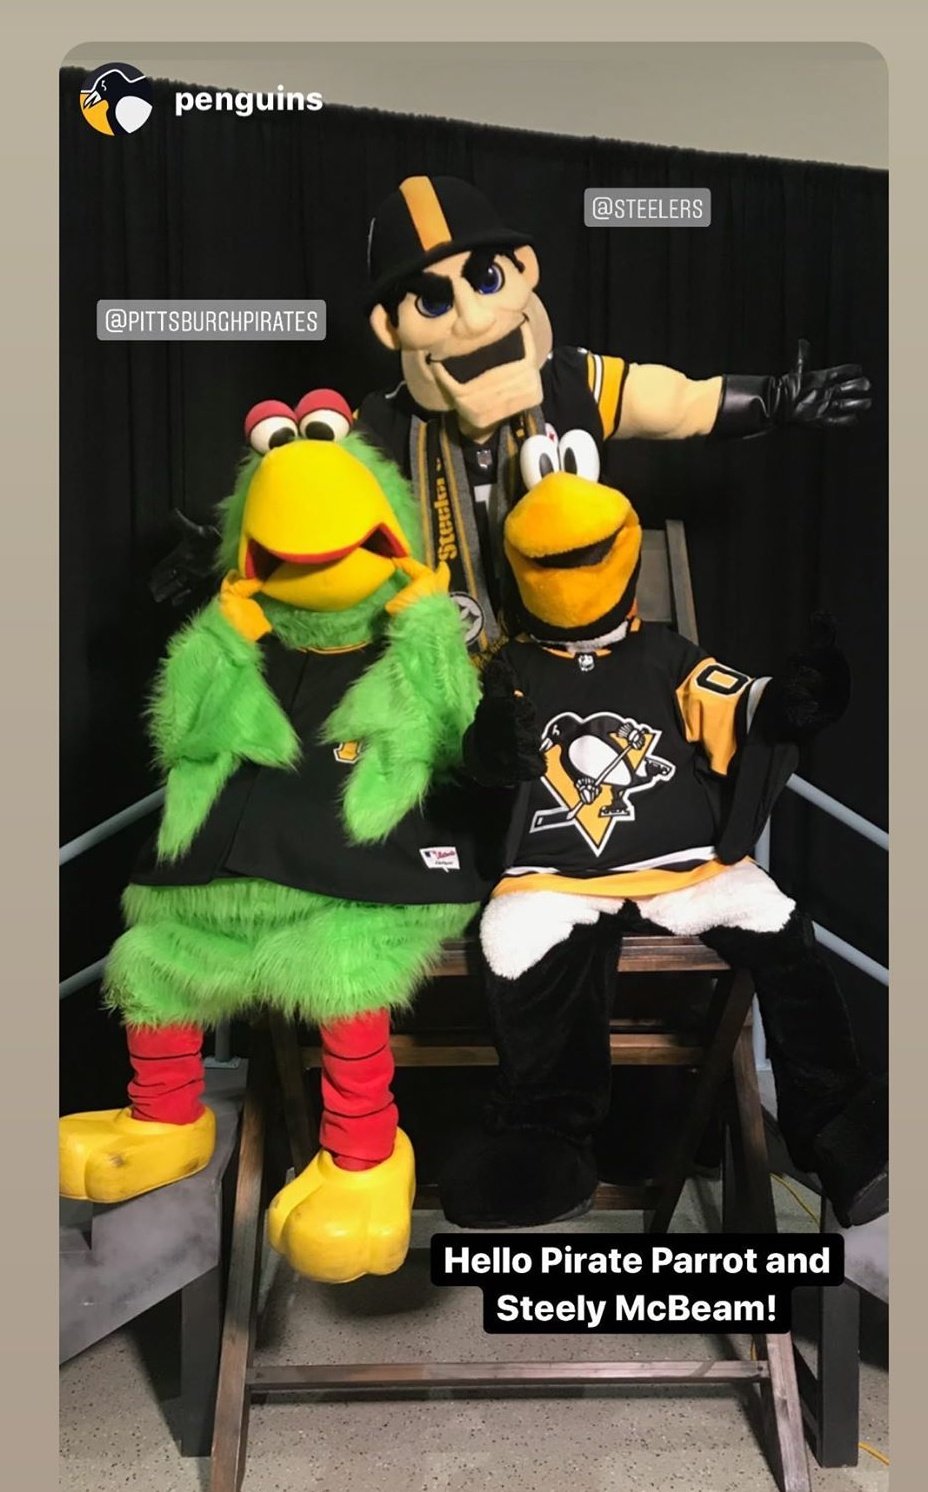 Pirate Parrot - PIttsburgh Pirates 